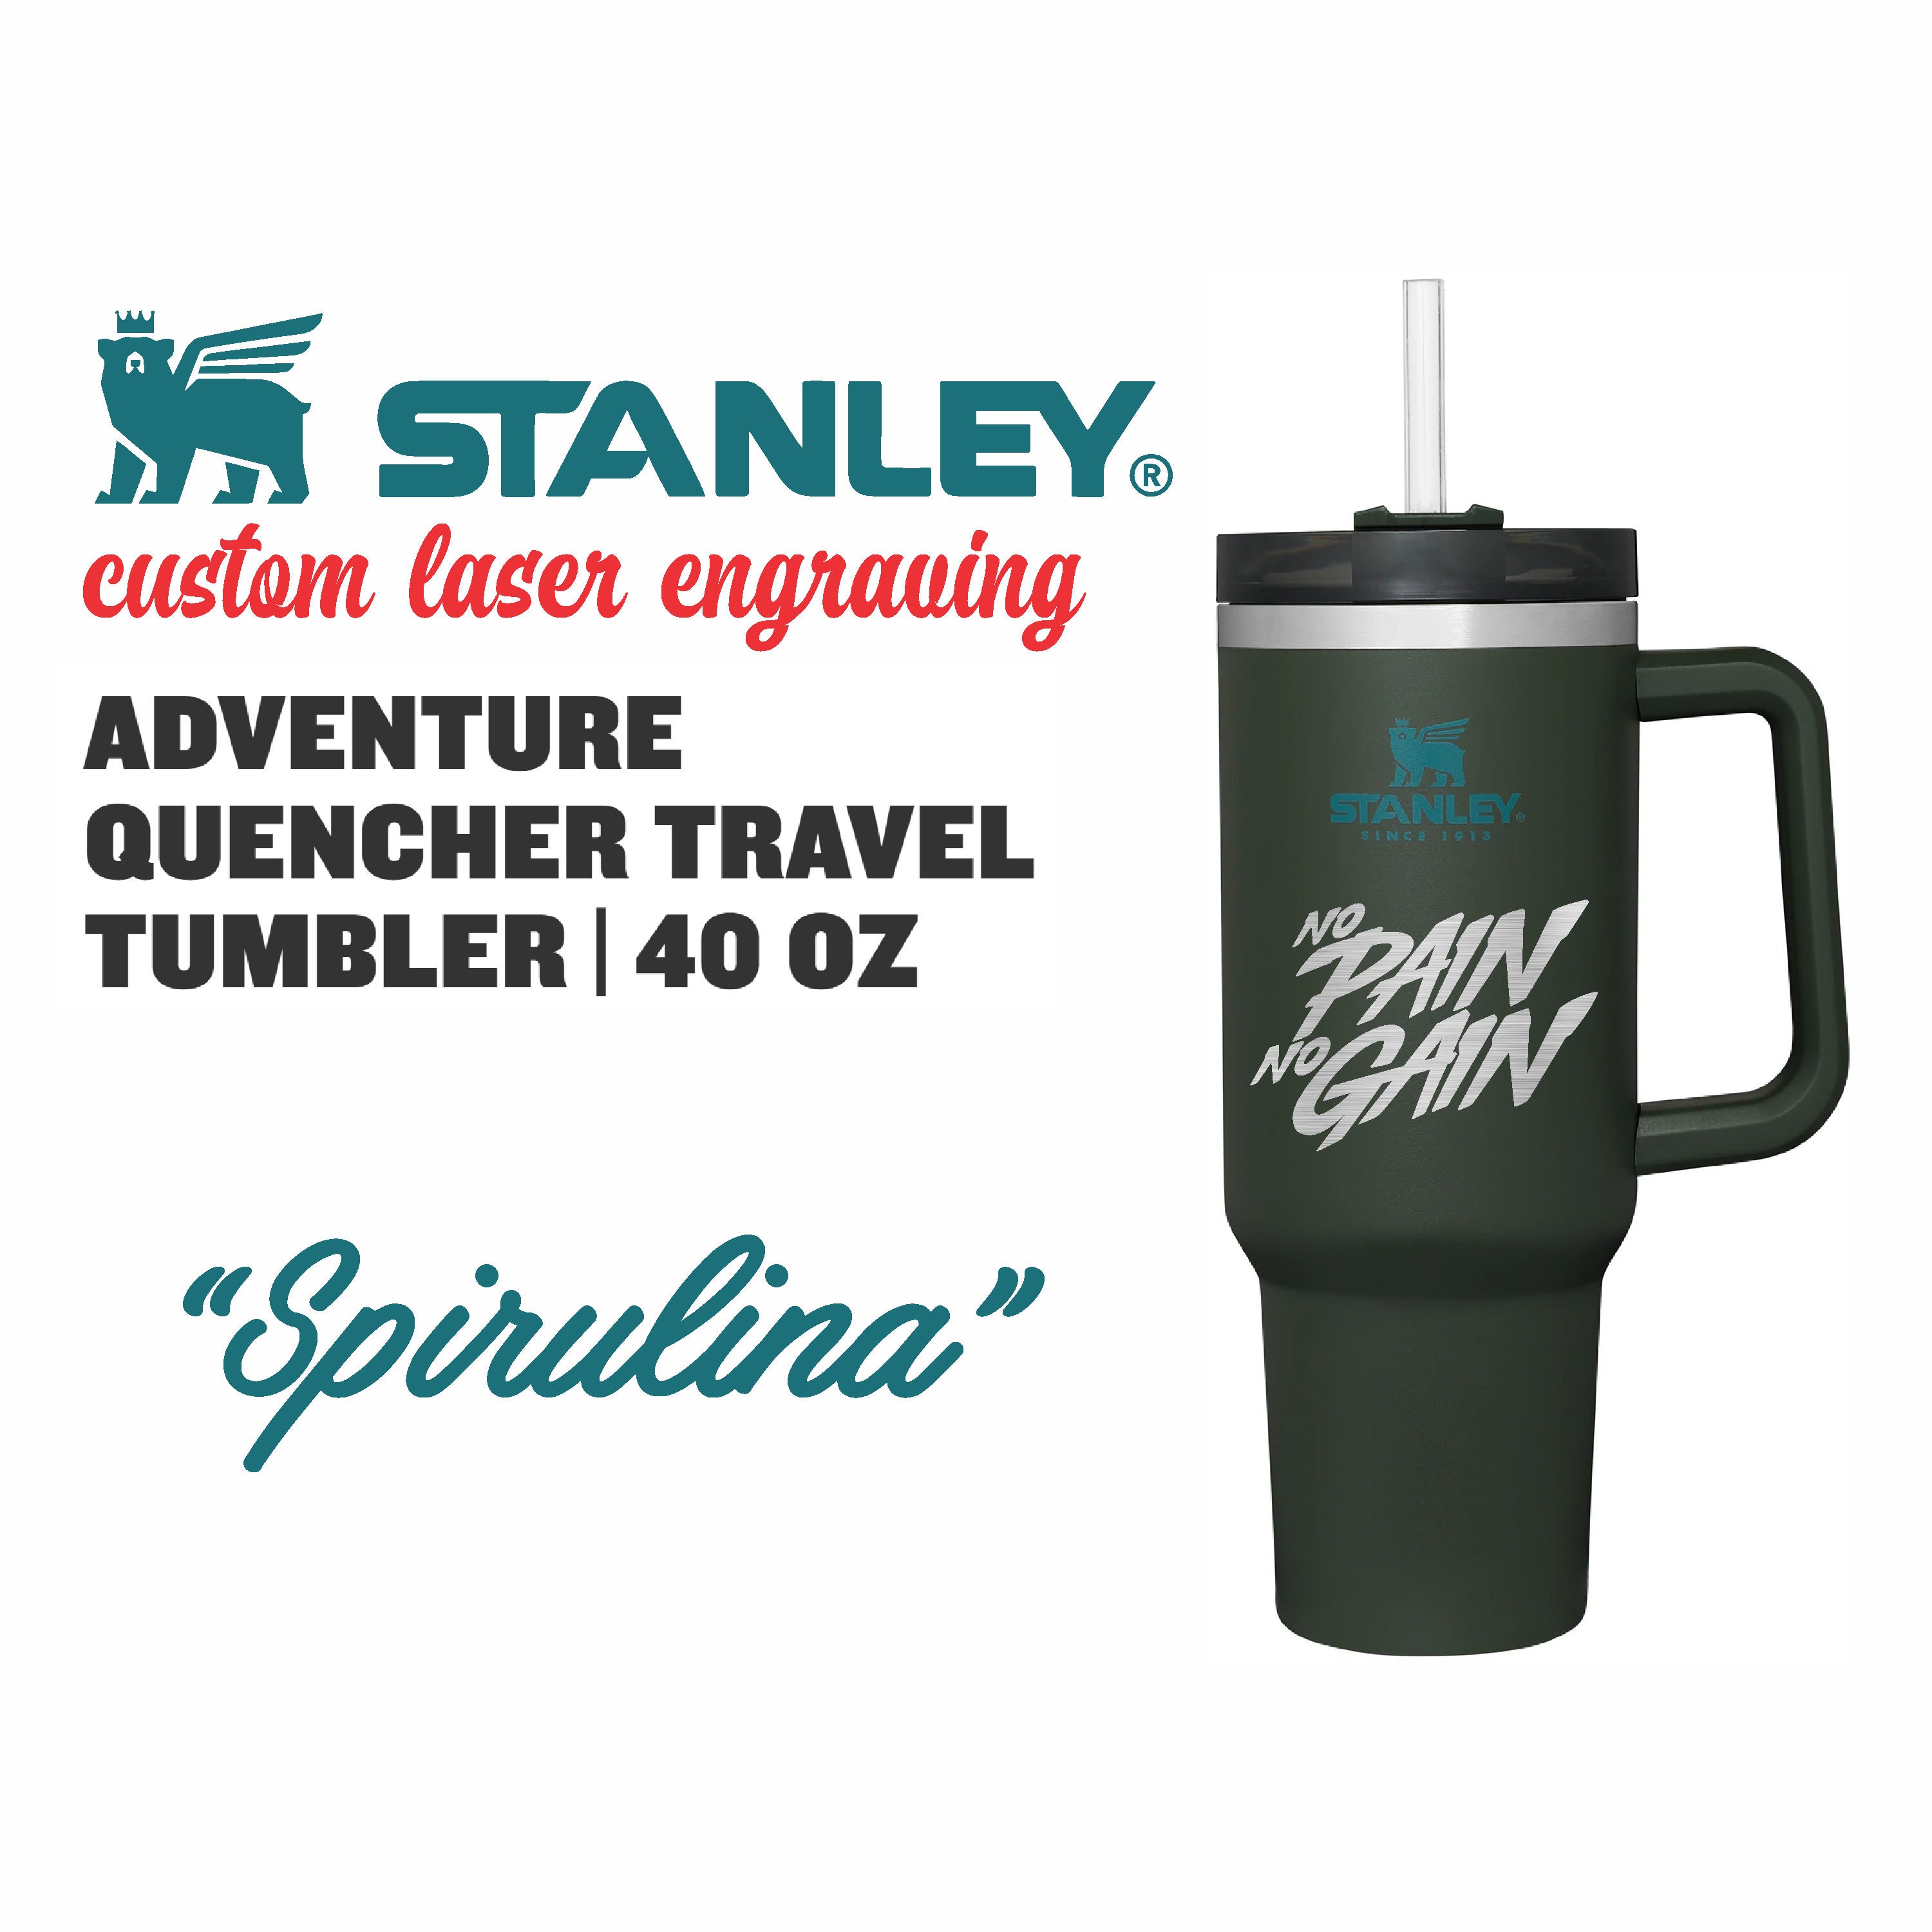 Stanley 40oz Spirulina Adventure Quencher Travel Tumbler FREE Laser  Engraving Stainless Steel Powder Coated Travel Mug With Lid & Straw 